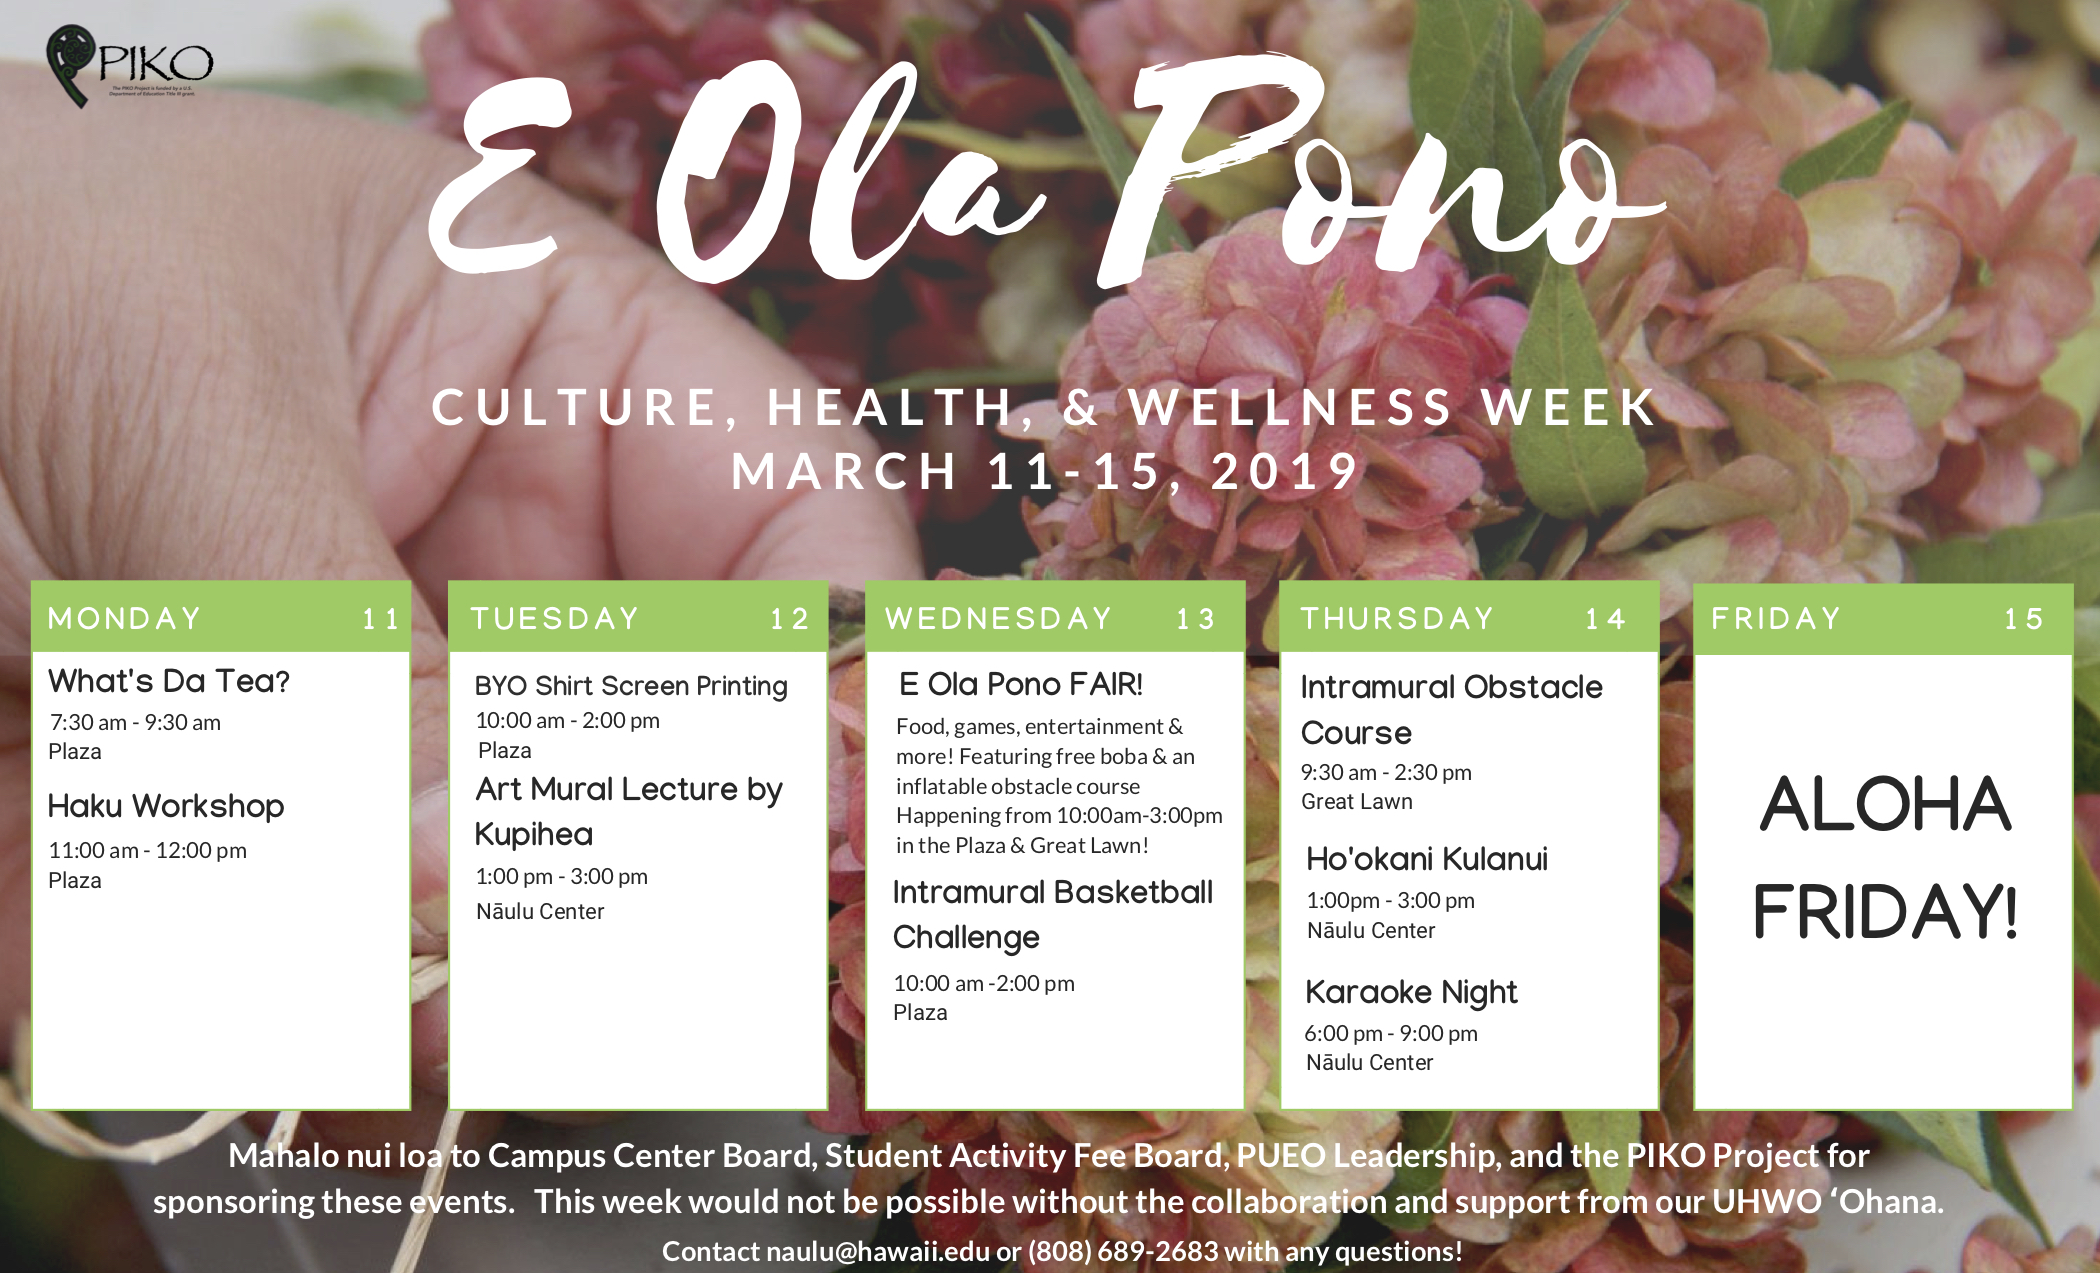 Flier for E Ola Pono Week showing each day's events against a background of flowers